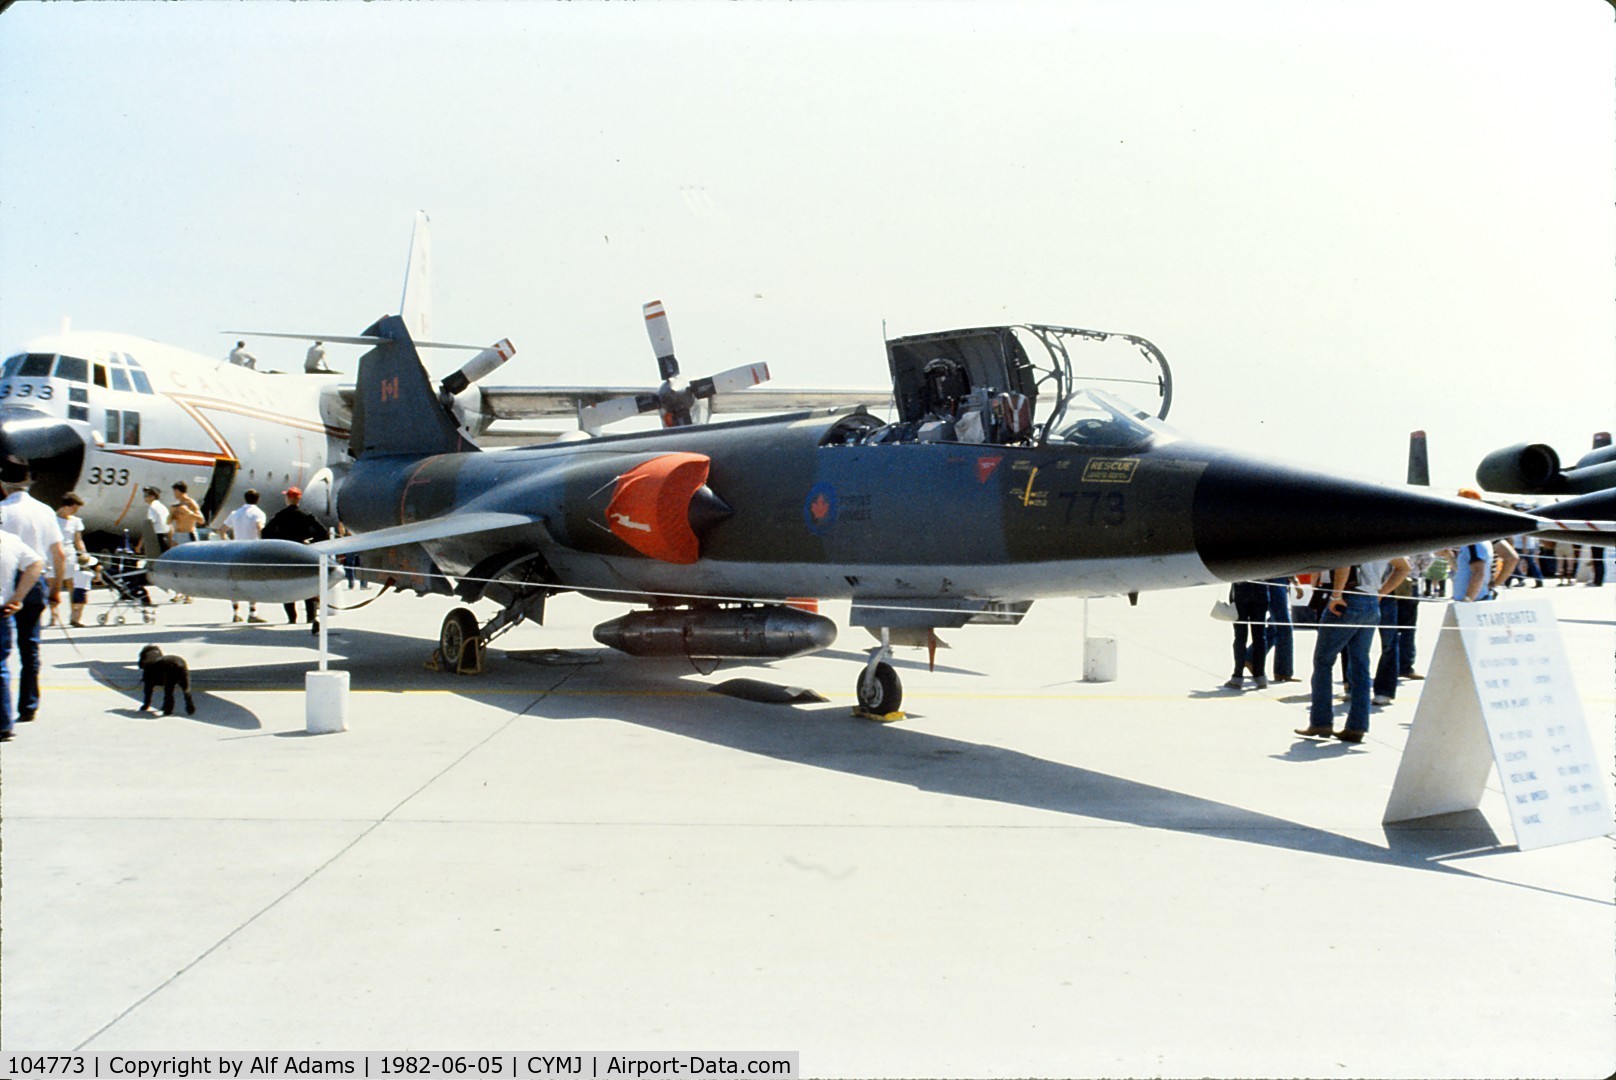 104773, 1962 Canadair CF-104 Starfighter C/N 683A-1066, Photo shows CF-104 Starfighter 104773 in 1982 when it was displayed at the Saskatchewan Airshow at Canadian Forces Base Moose Jaw, Saskatchewan, Canada.